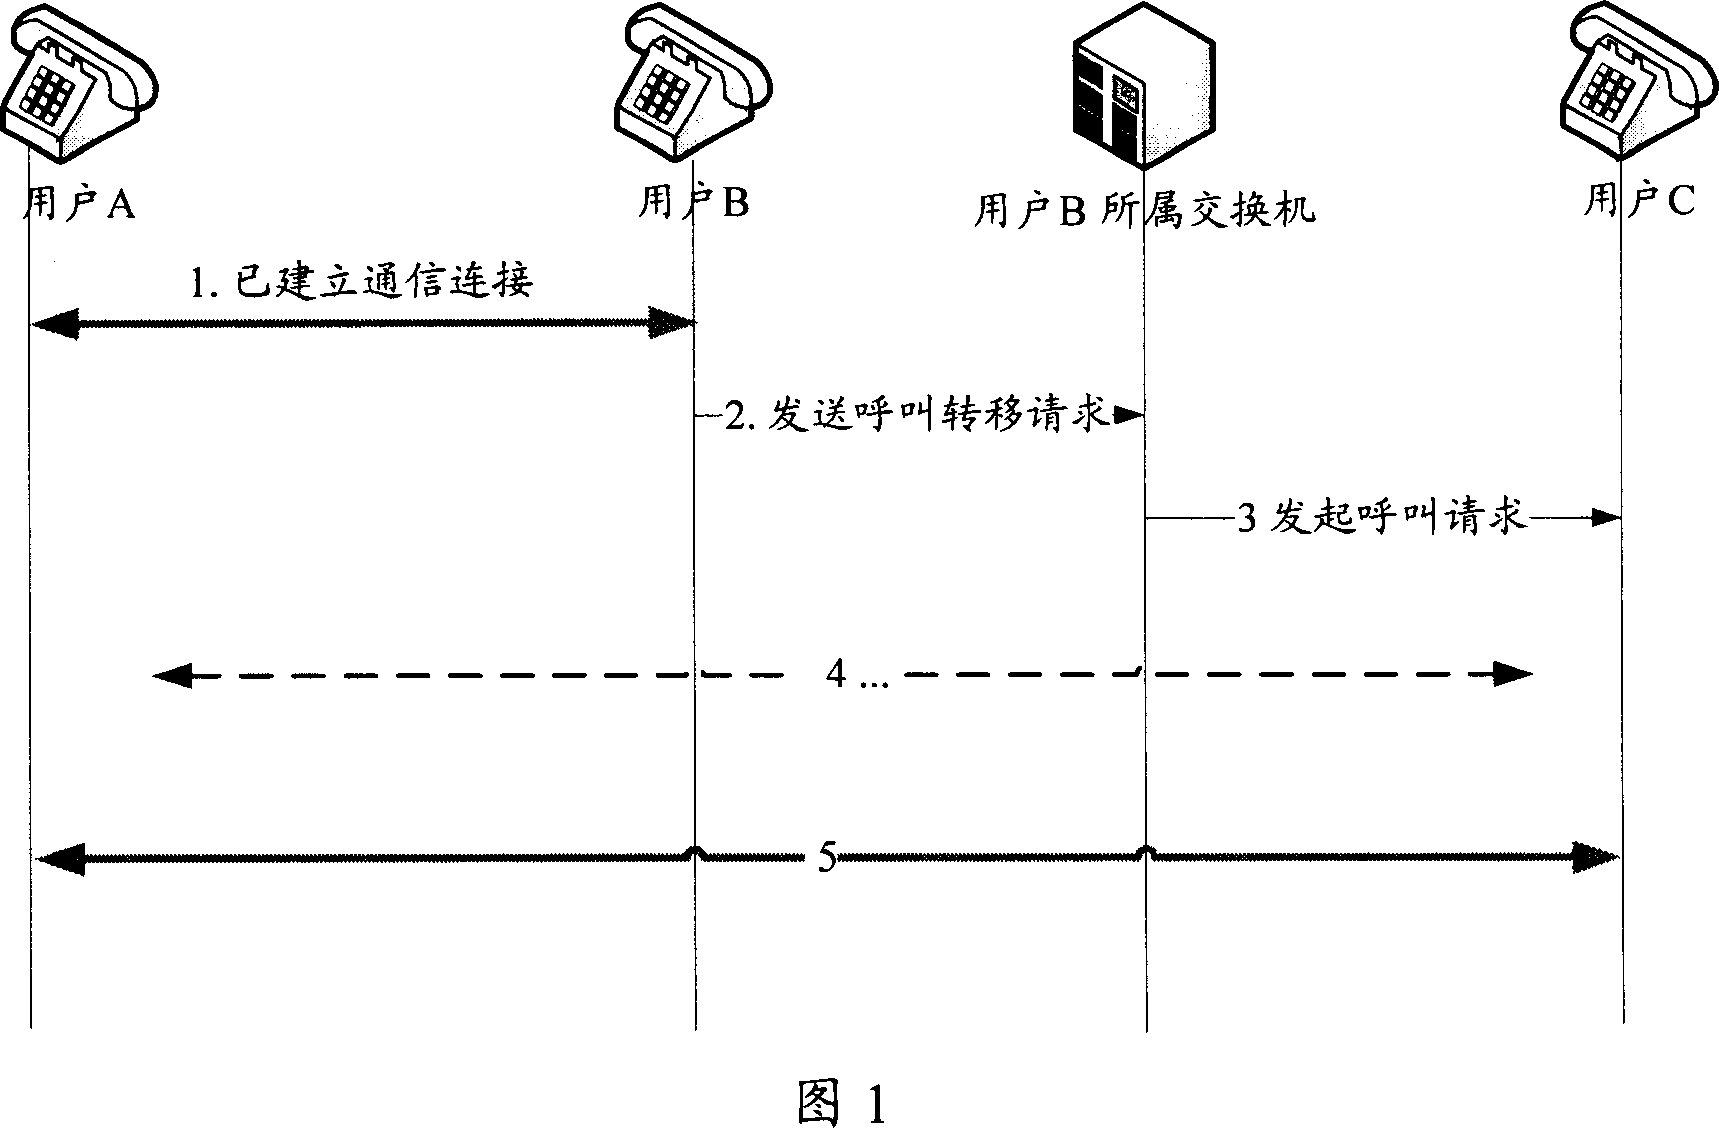 Exchanger and call transfer method